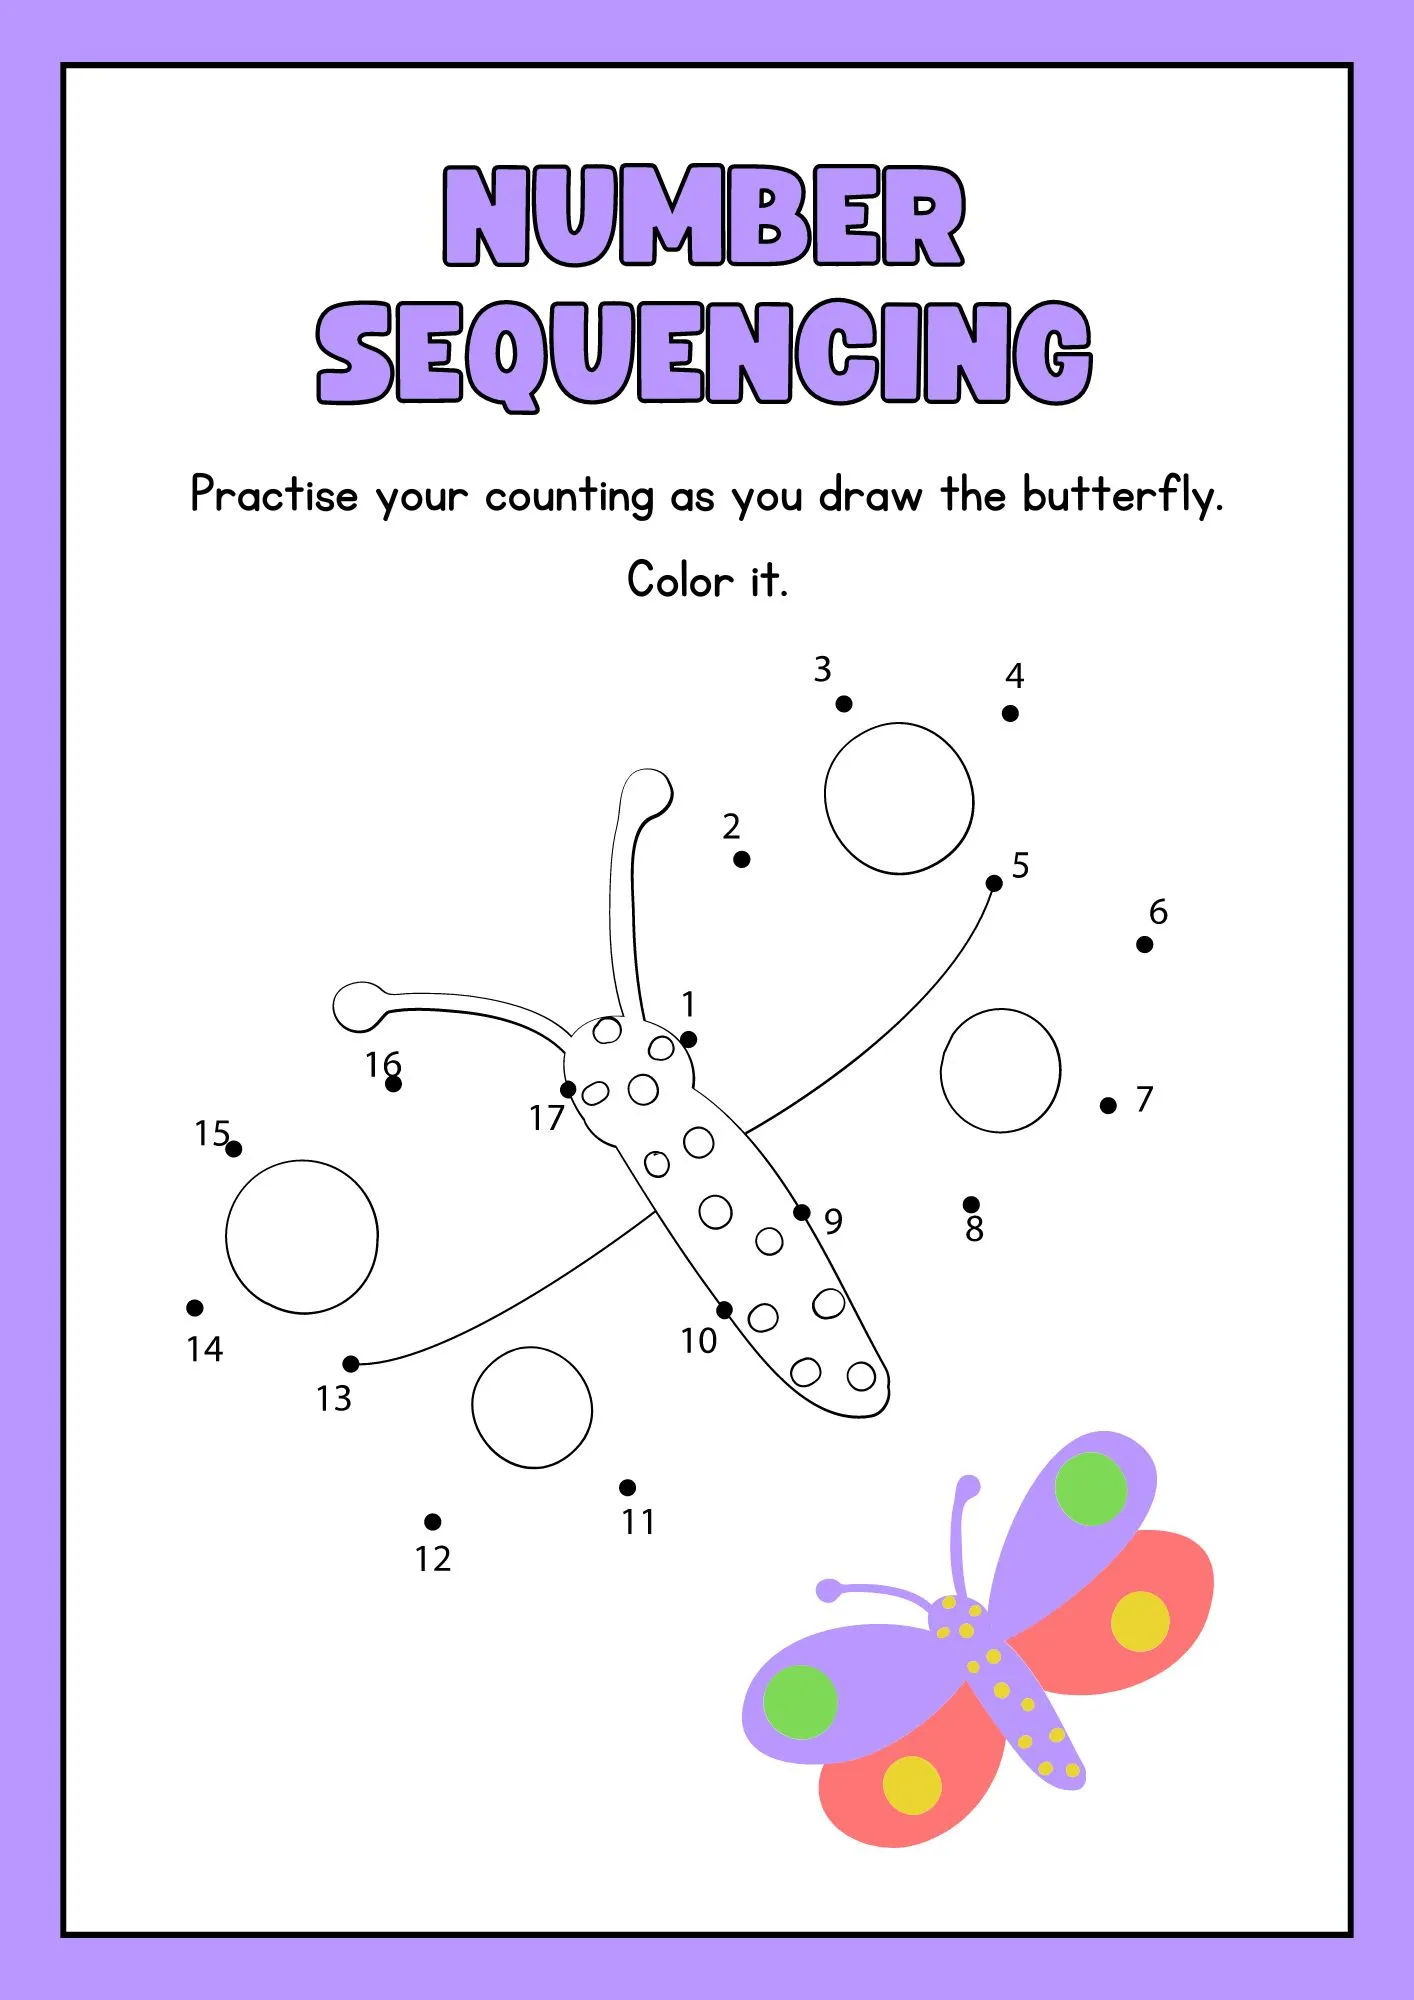 Number Sequencing Activity Worksheet trace and color the (butterfly)